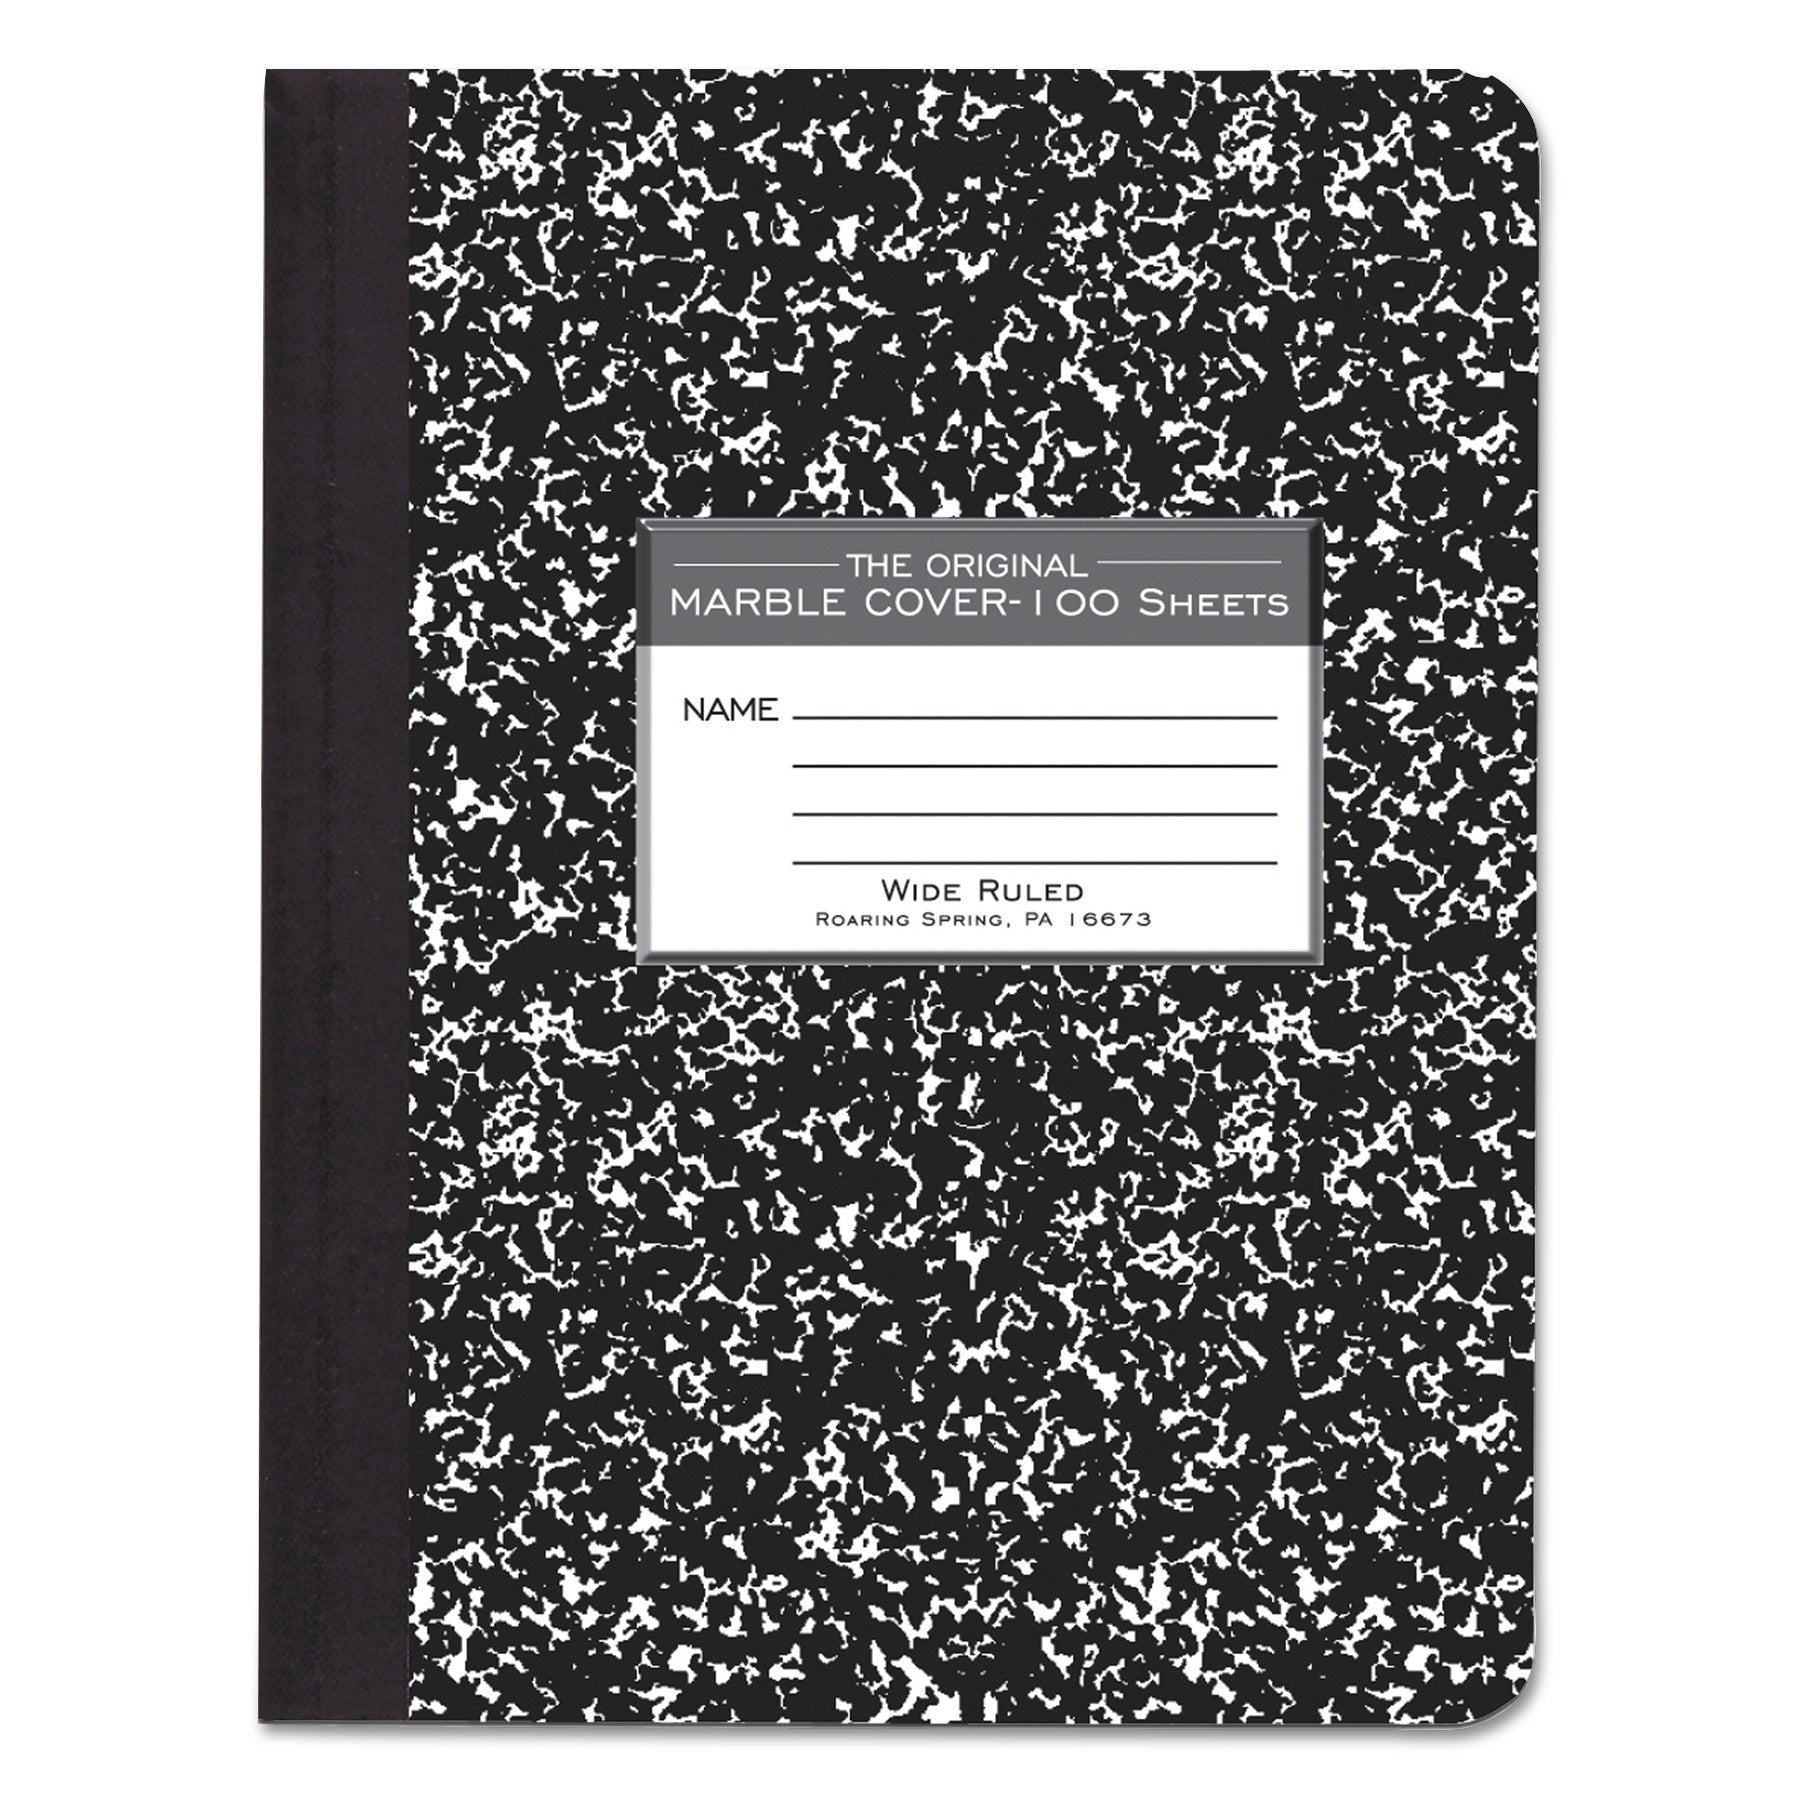 Marble Cover Composition Book, Wide/Legal Rule, Black Marble Cover, (100) 9.75 x 7.5 Sheets - 